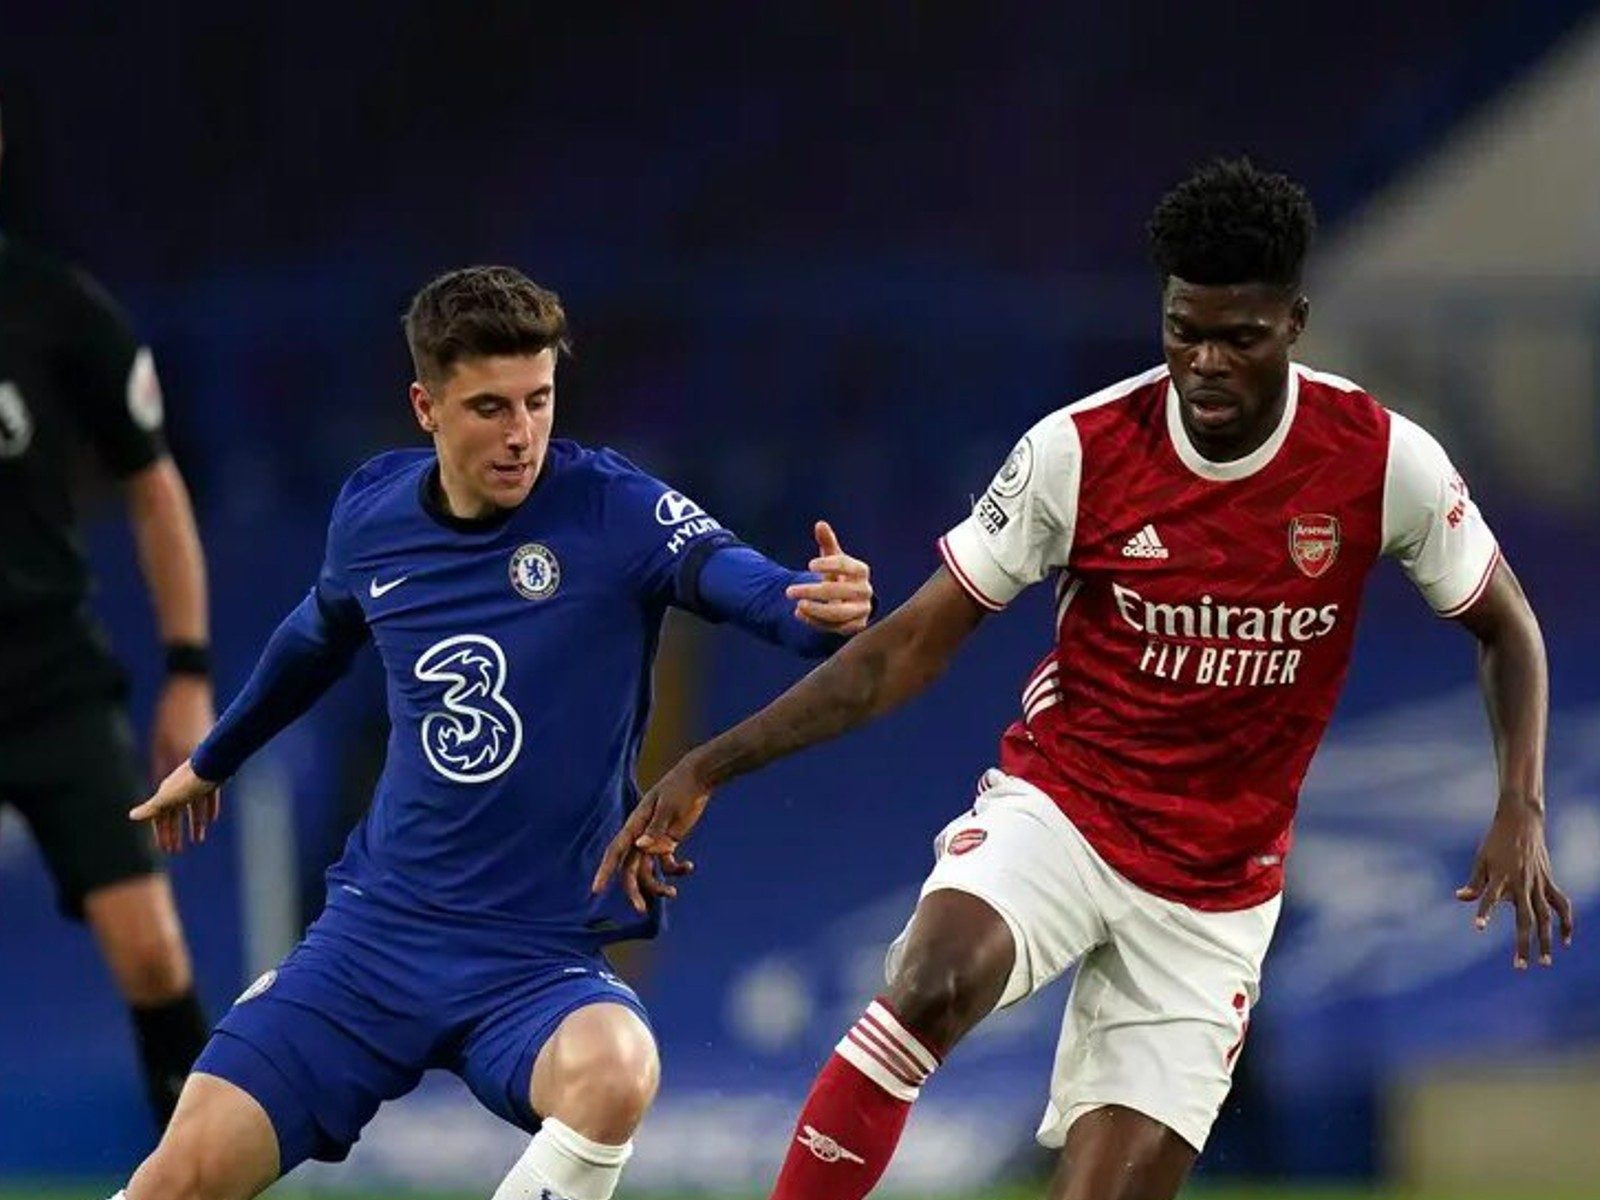 Arsenal vs Chelsea Live Streaming When and Where to Watch Florida Cup Live Coverage on Live TV Online